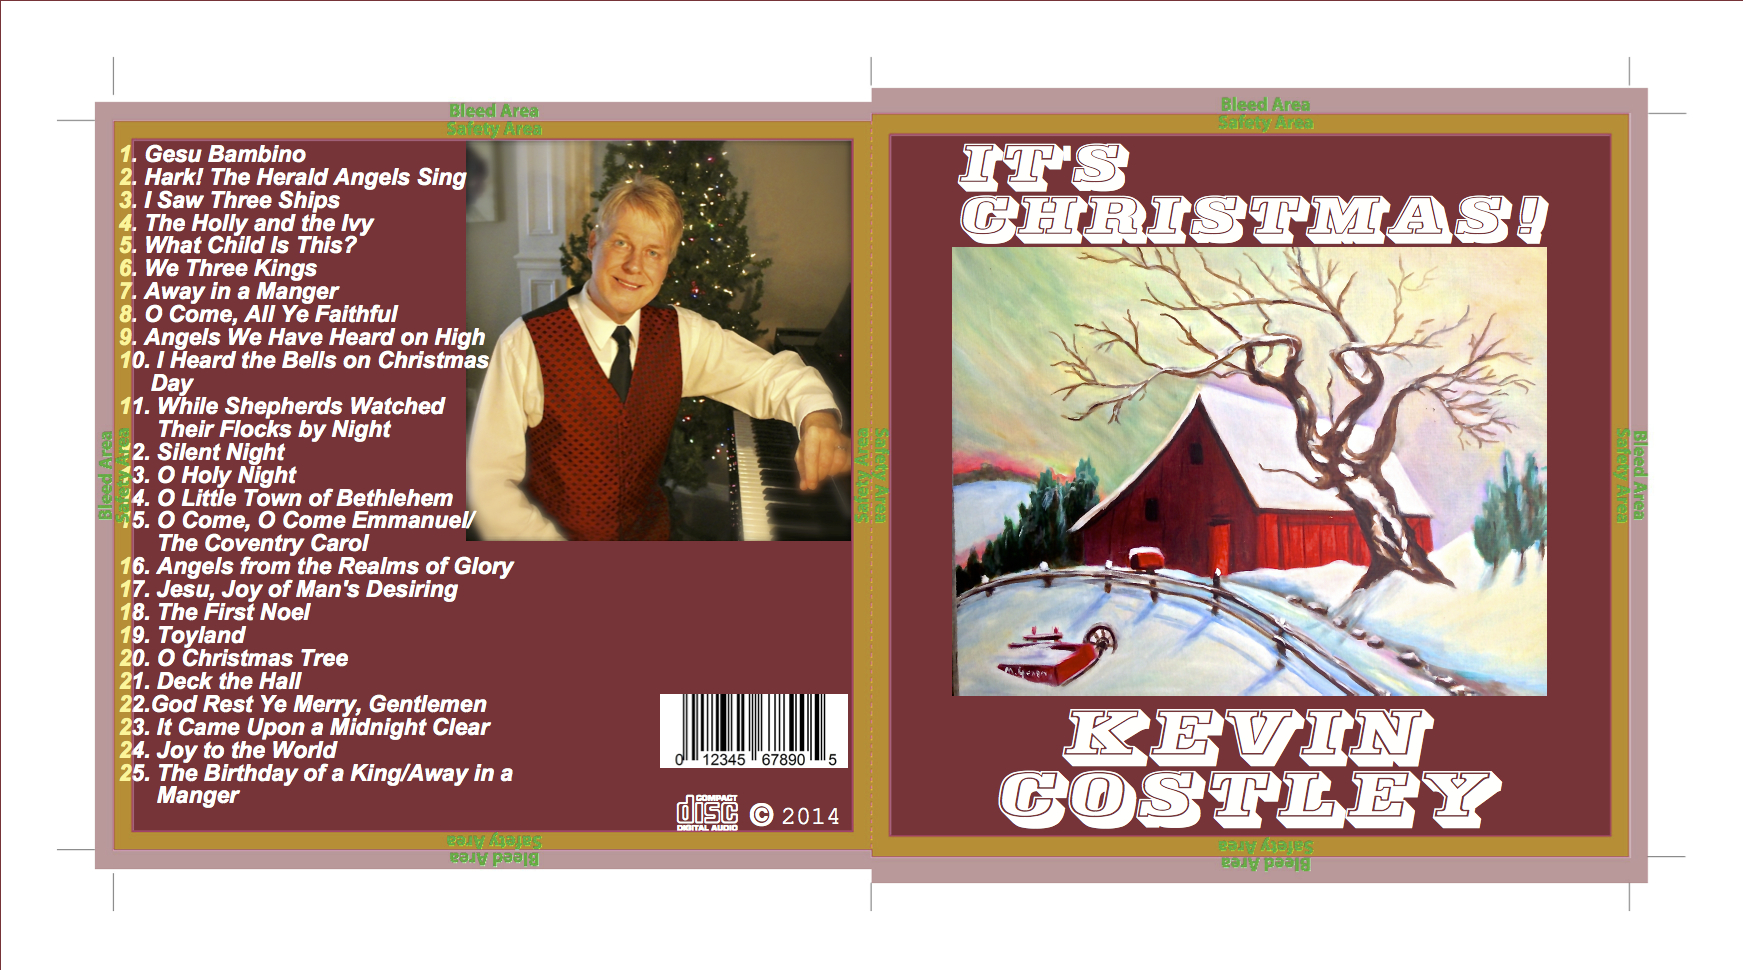  "It's Christmas!", an album for the holidays. Find out how to get your own copy by clicking on, "Order CD's" on the left hand side of the page.&nbsp; 